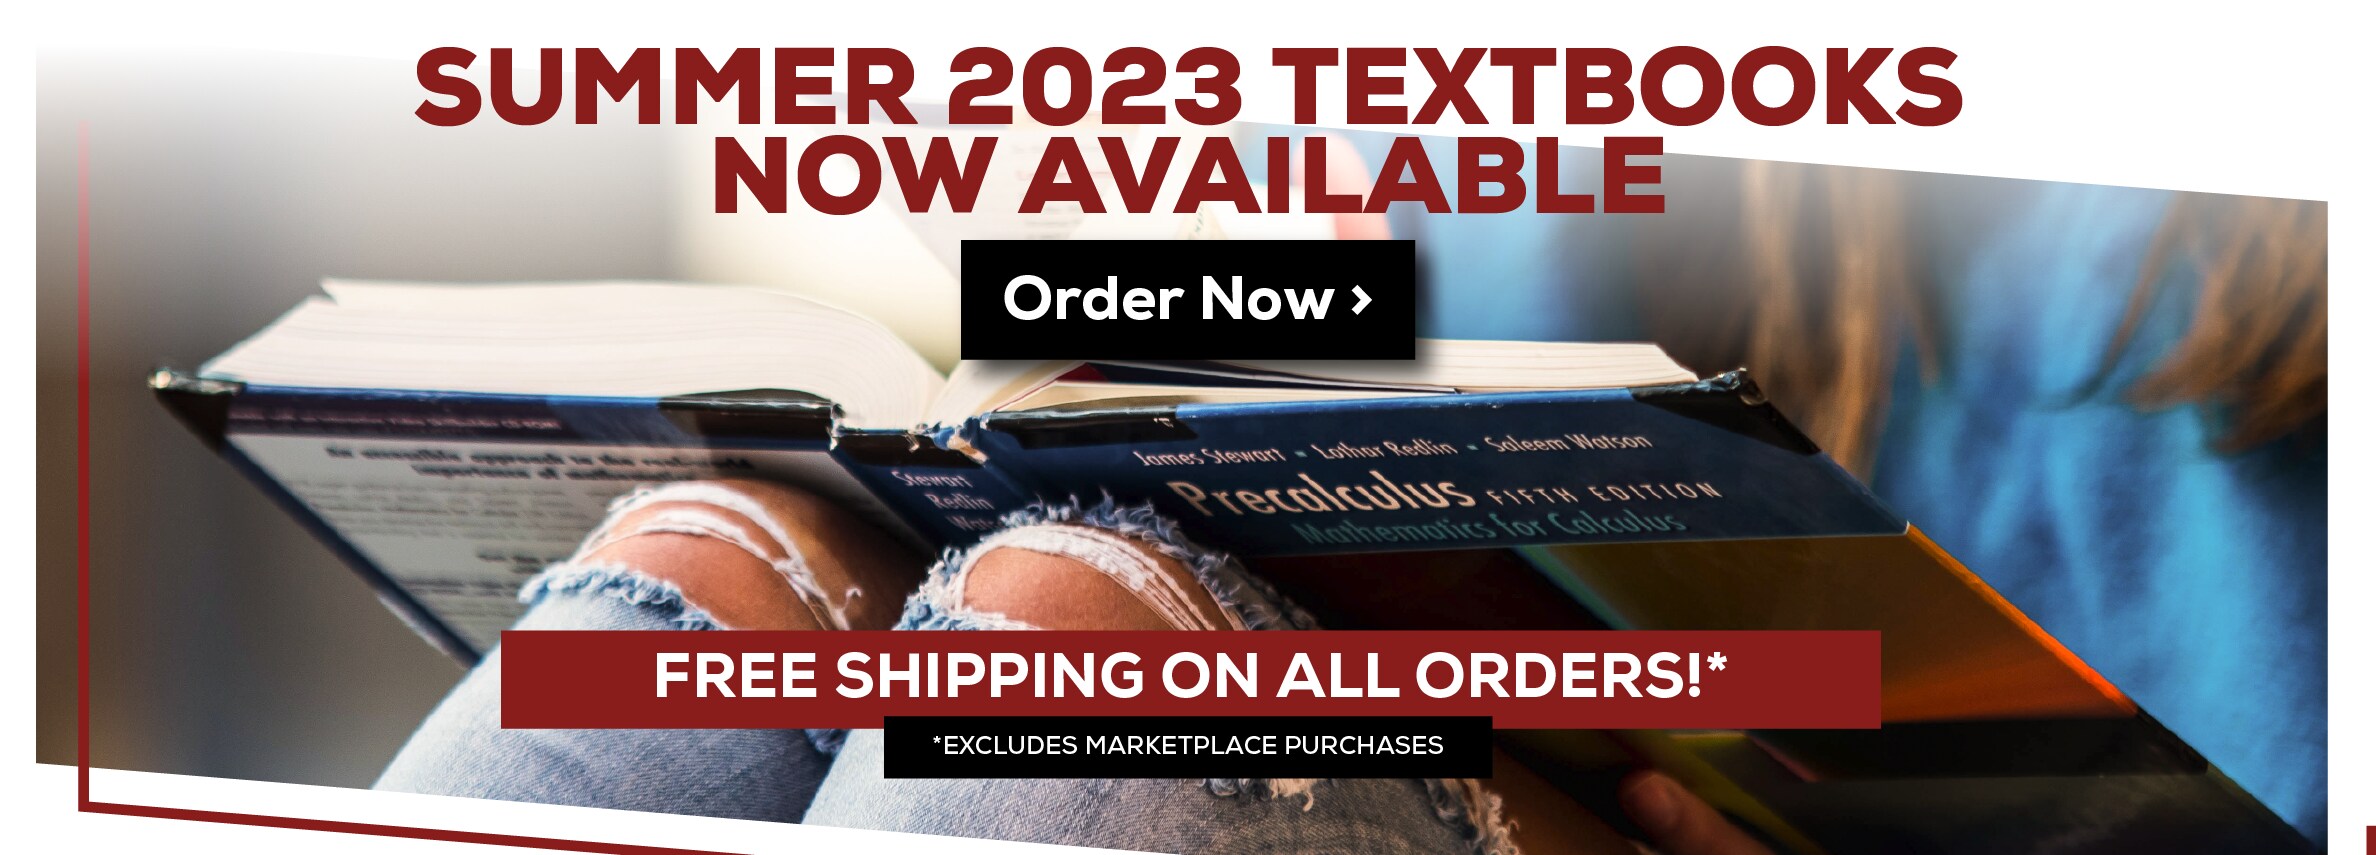 Summer 2023 Textbooks Now Available. Order Now. Free shipping on all orders!* *Excludes Marketplace Purchases (new tab)